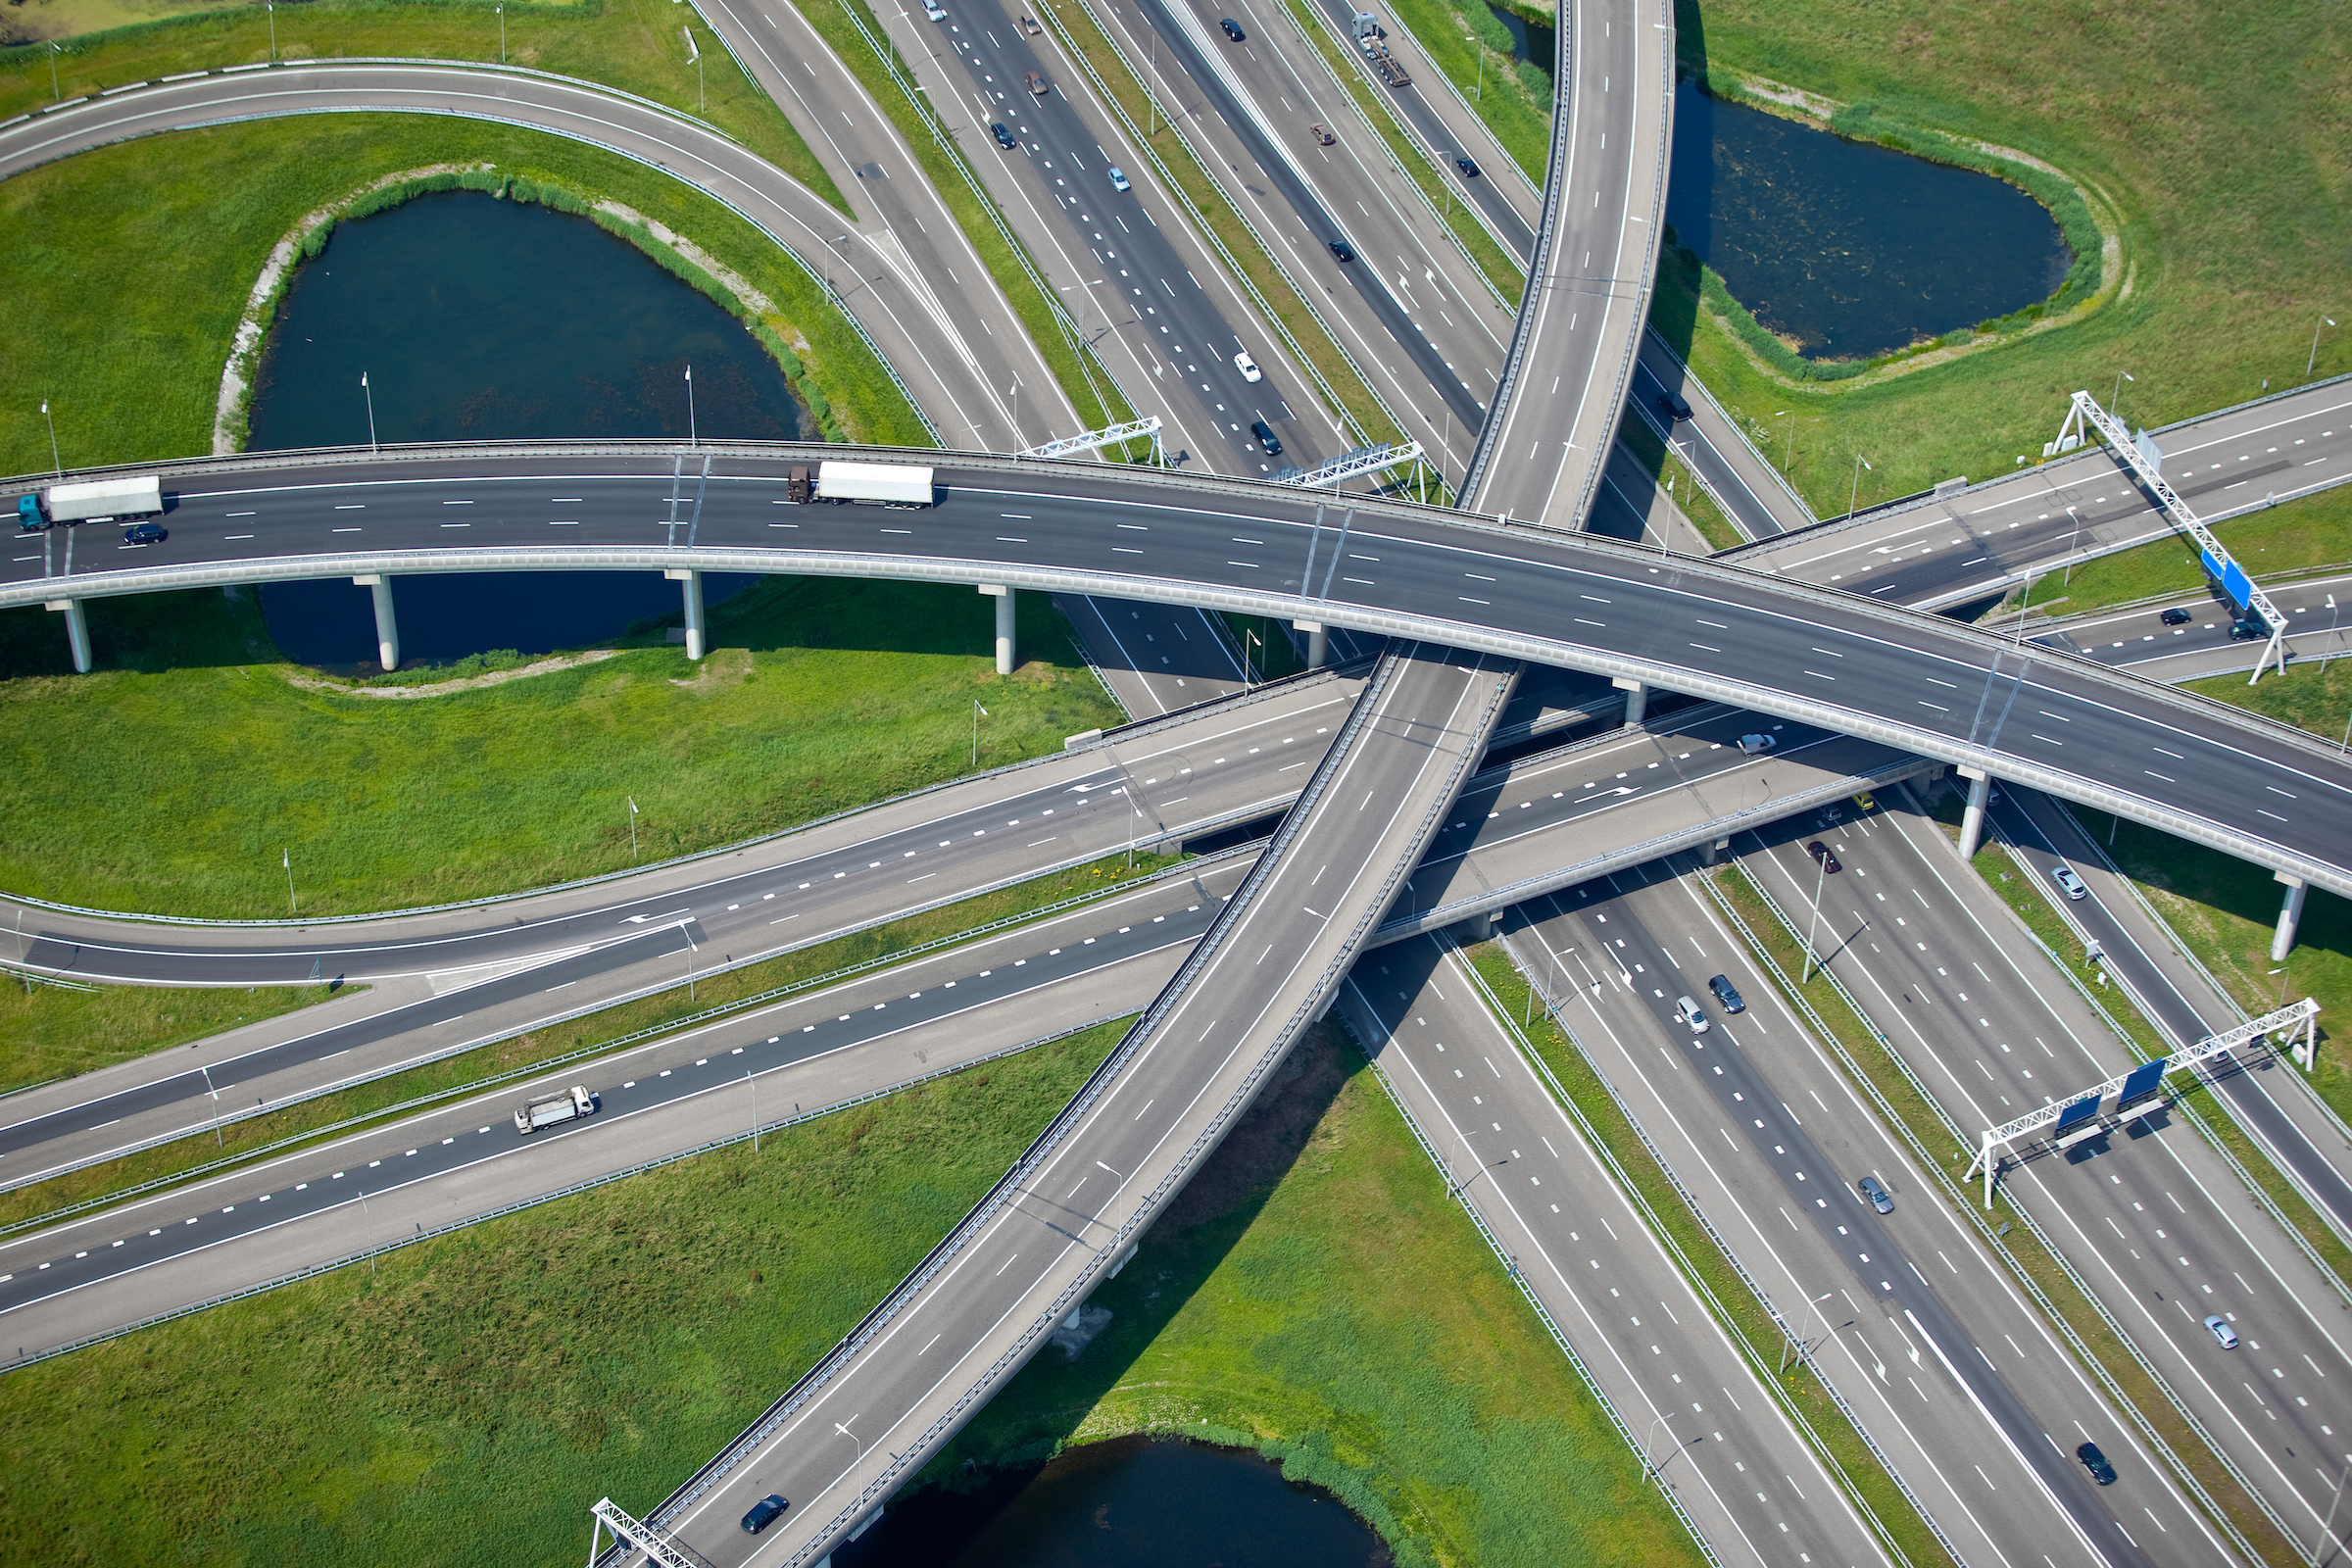 Roads/highways intersecting each other.